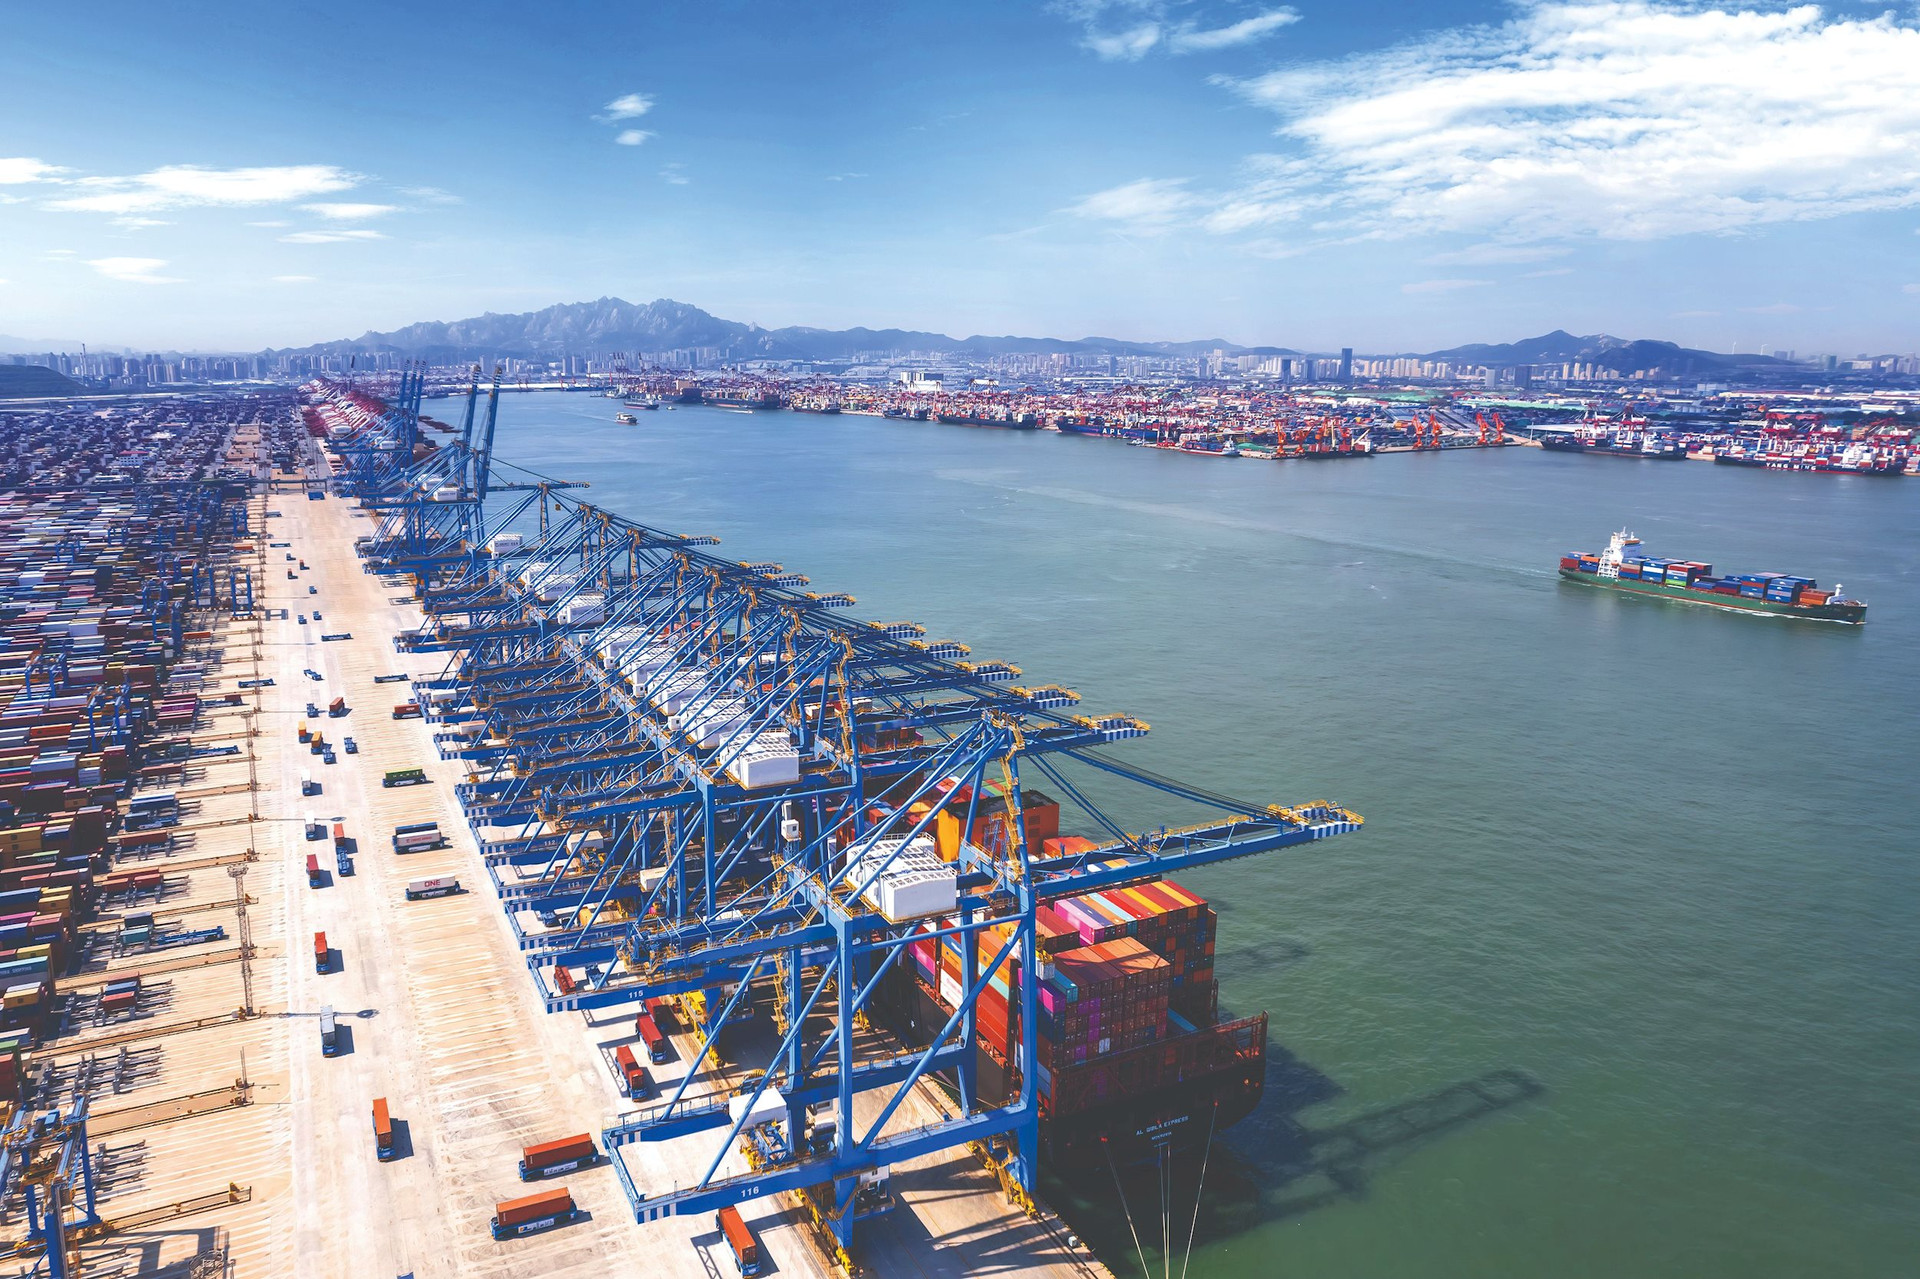 dock-cranes-loading-containers-trade-port-shipping-compressed.jpeg